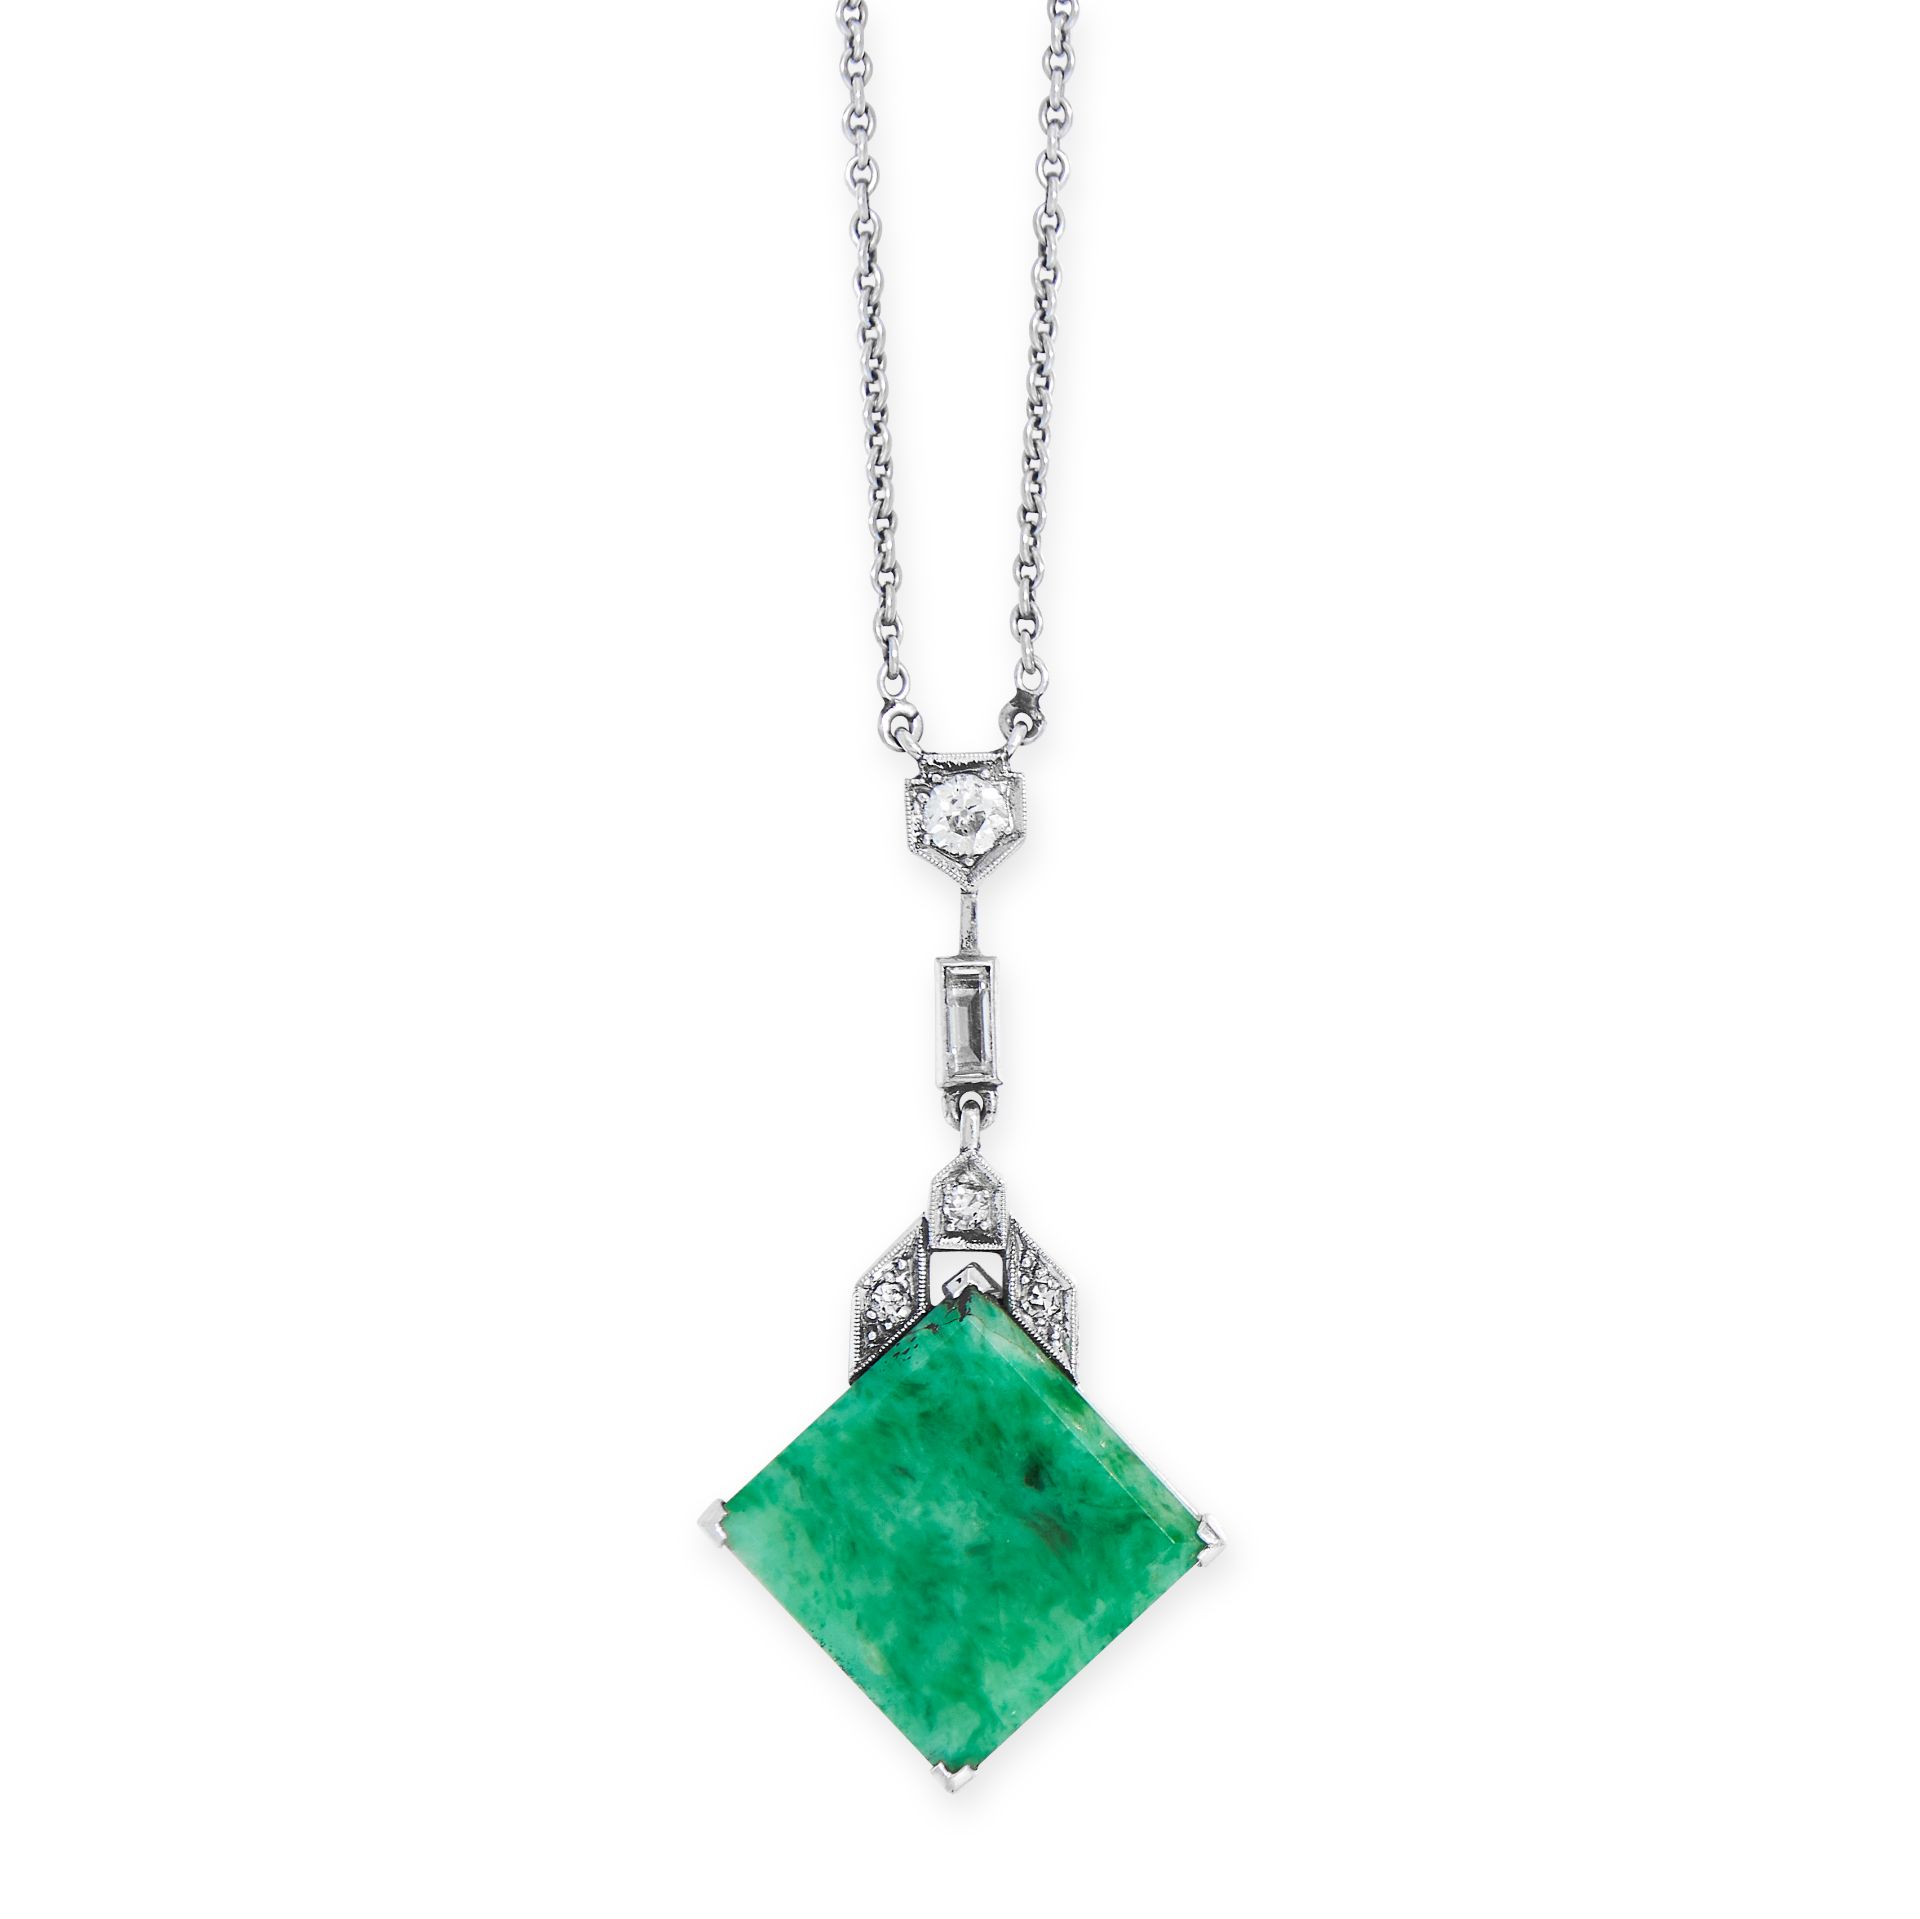 A JADEITE JADE AND DIAMOND PENDANT NECKLACE, EARLY 20TH CENTURY set with a square jadeite cabochon